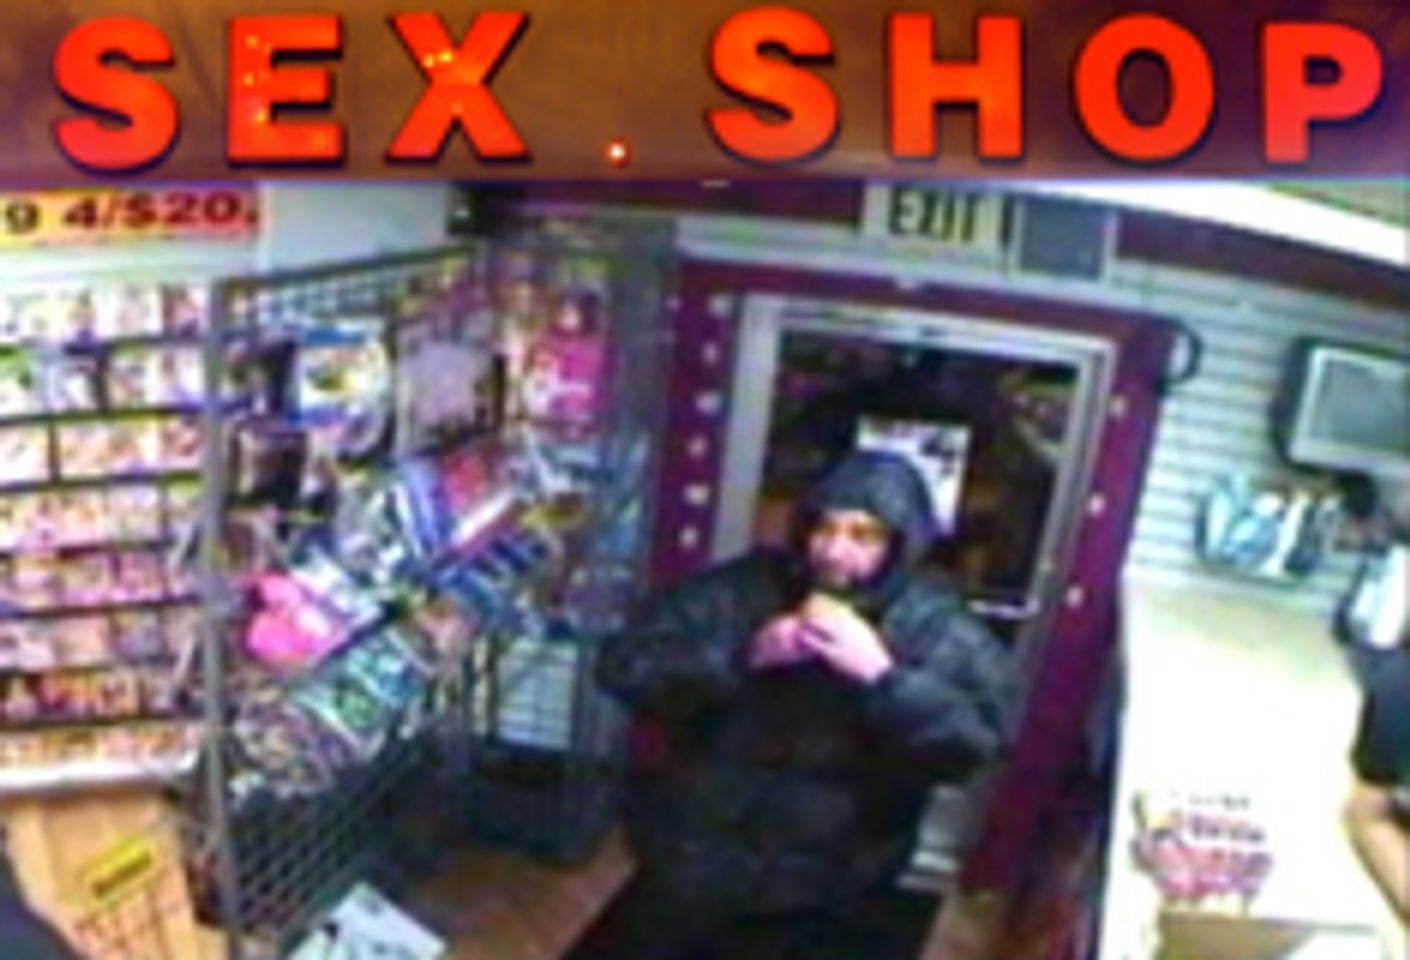 Man With Hatchet Robs Adult Novelty Store